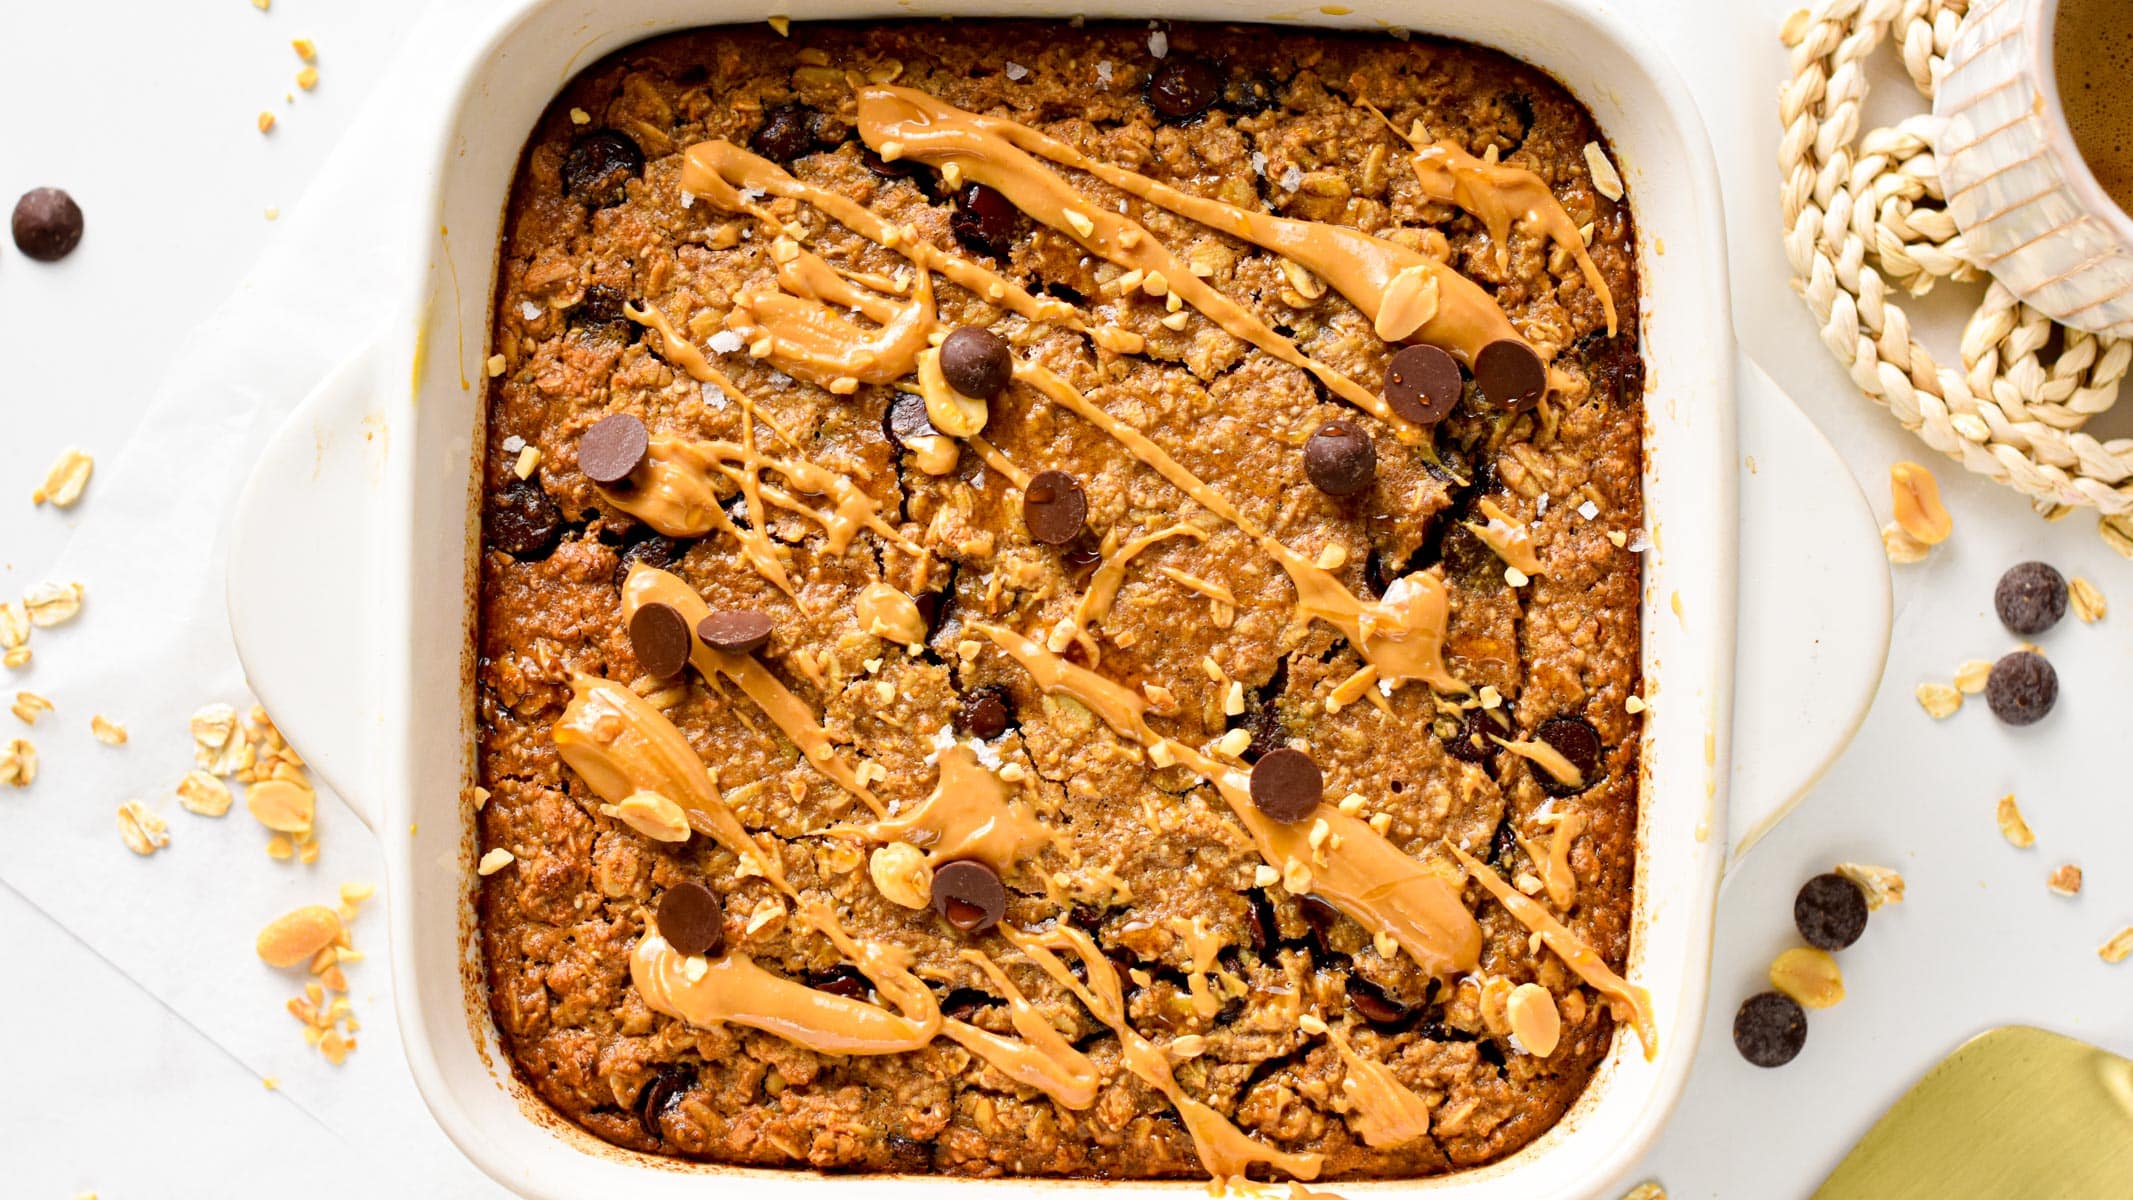 This Peanut Butter Baked Oatmeal is a simple, healthy high-protein breakfast perfect as a one-pan breakfast brunch or to meal prep a week of healthy oatmeal.